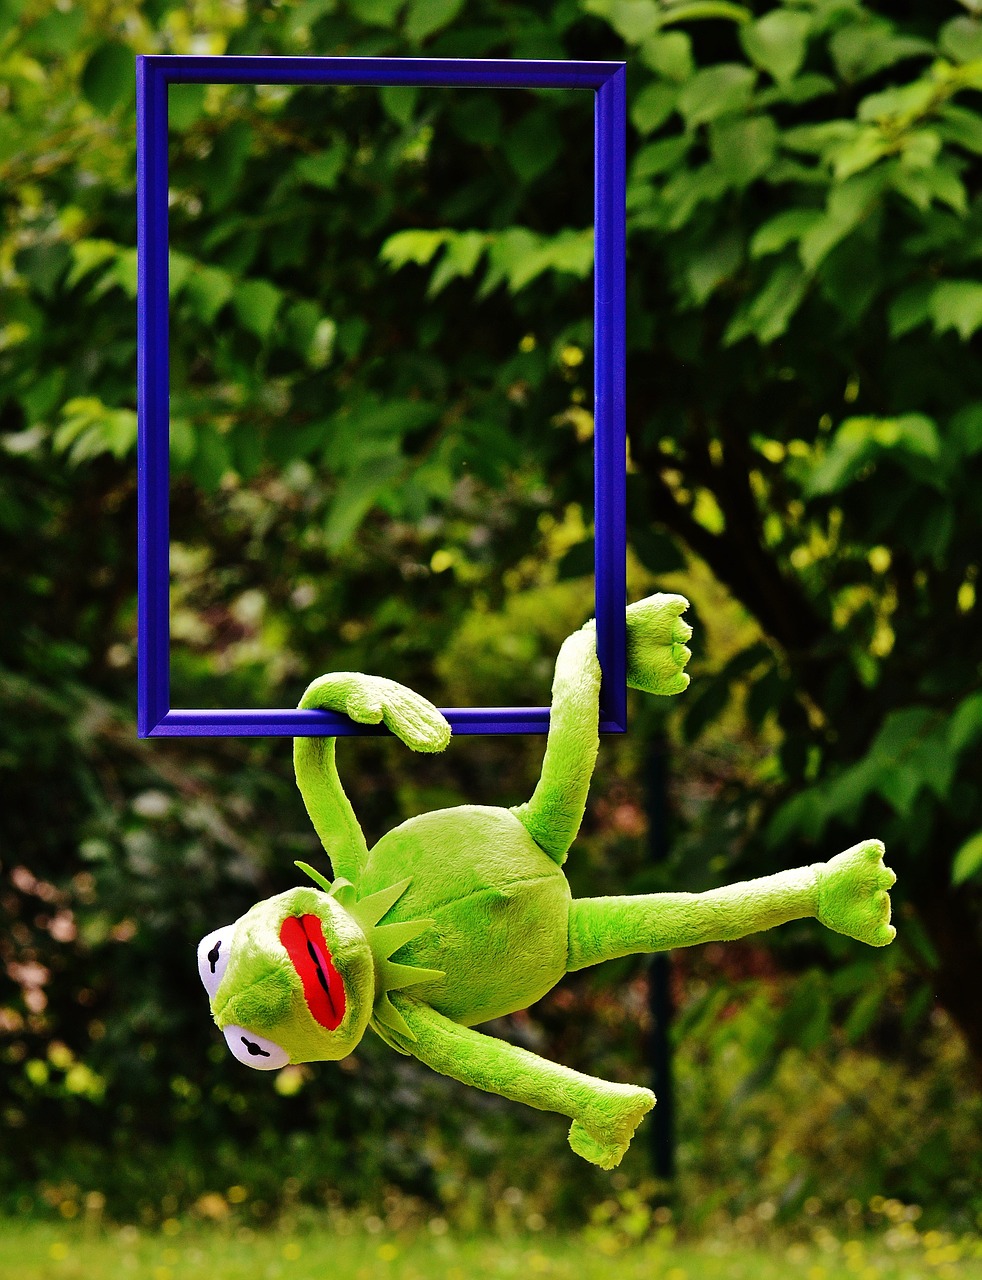 out of the ordinary kermit frog free photo